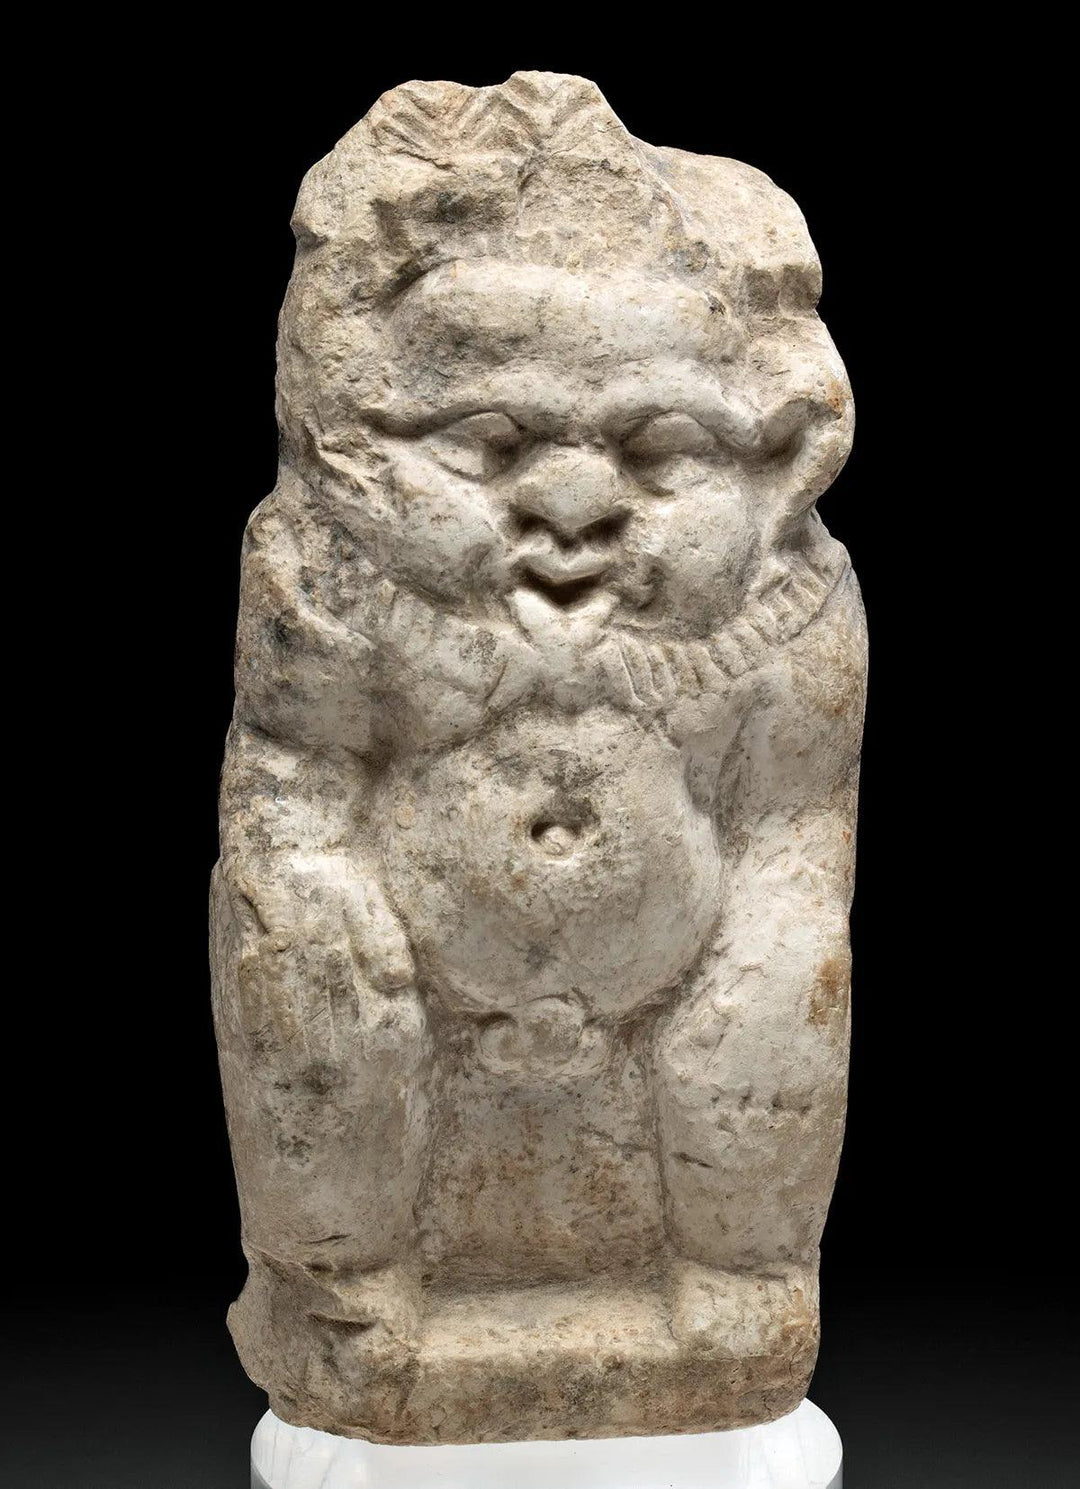 Romano-Egyptian Limestone Statue of God Bes - 1st to 2nd Century CE | Christie's Auction